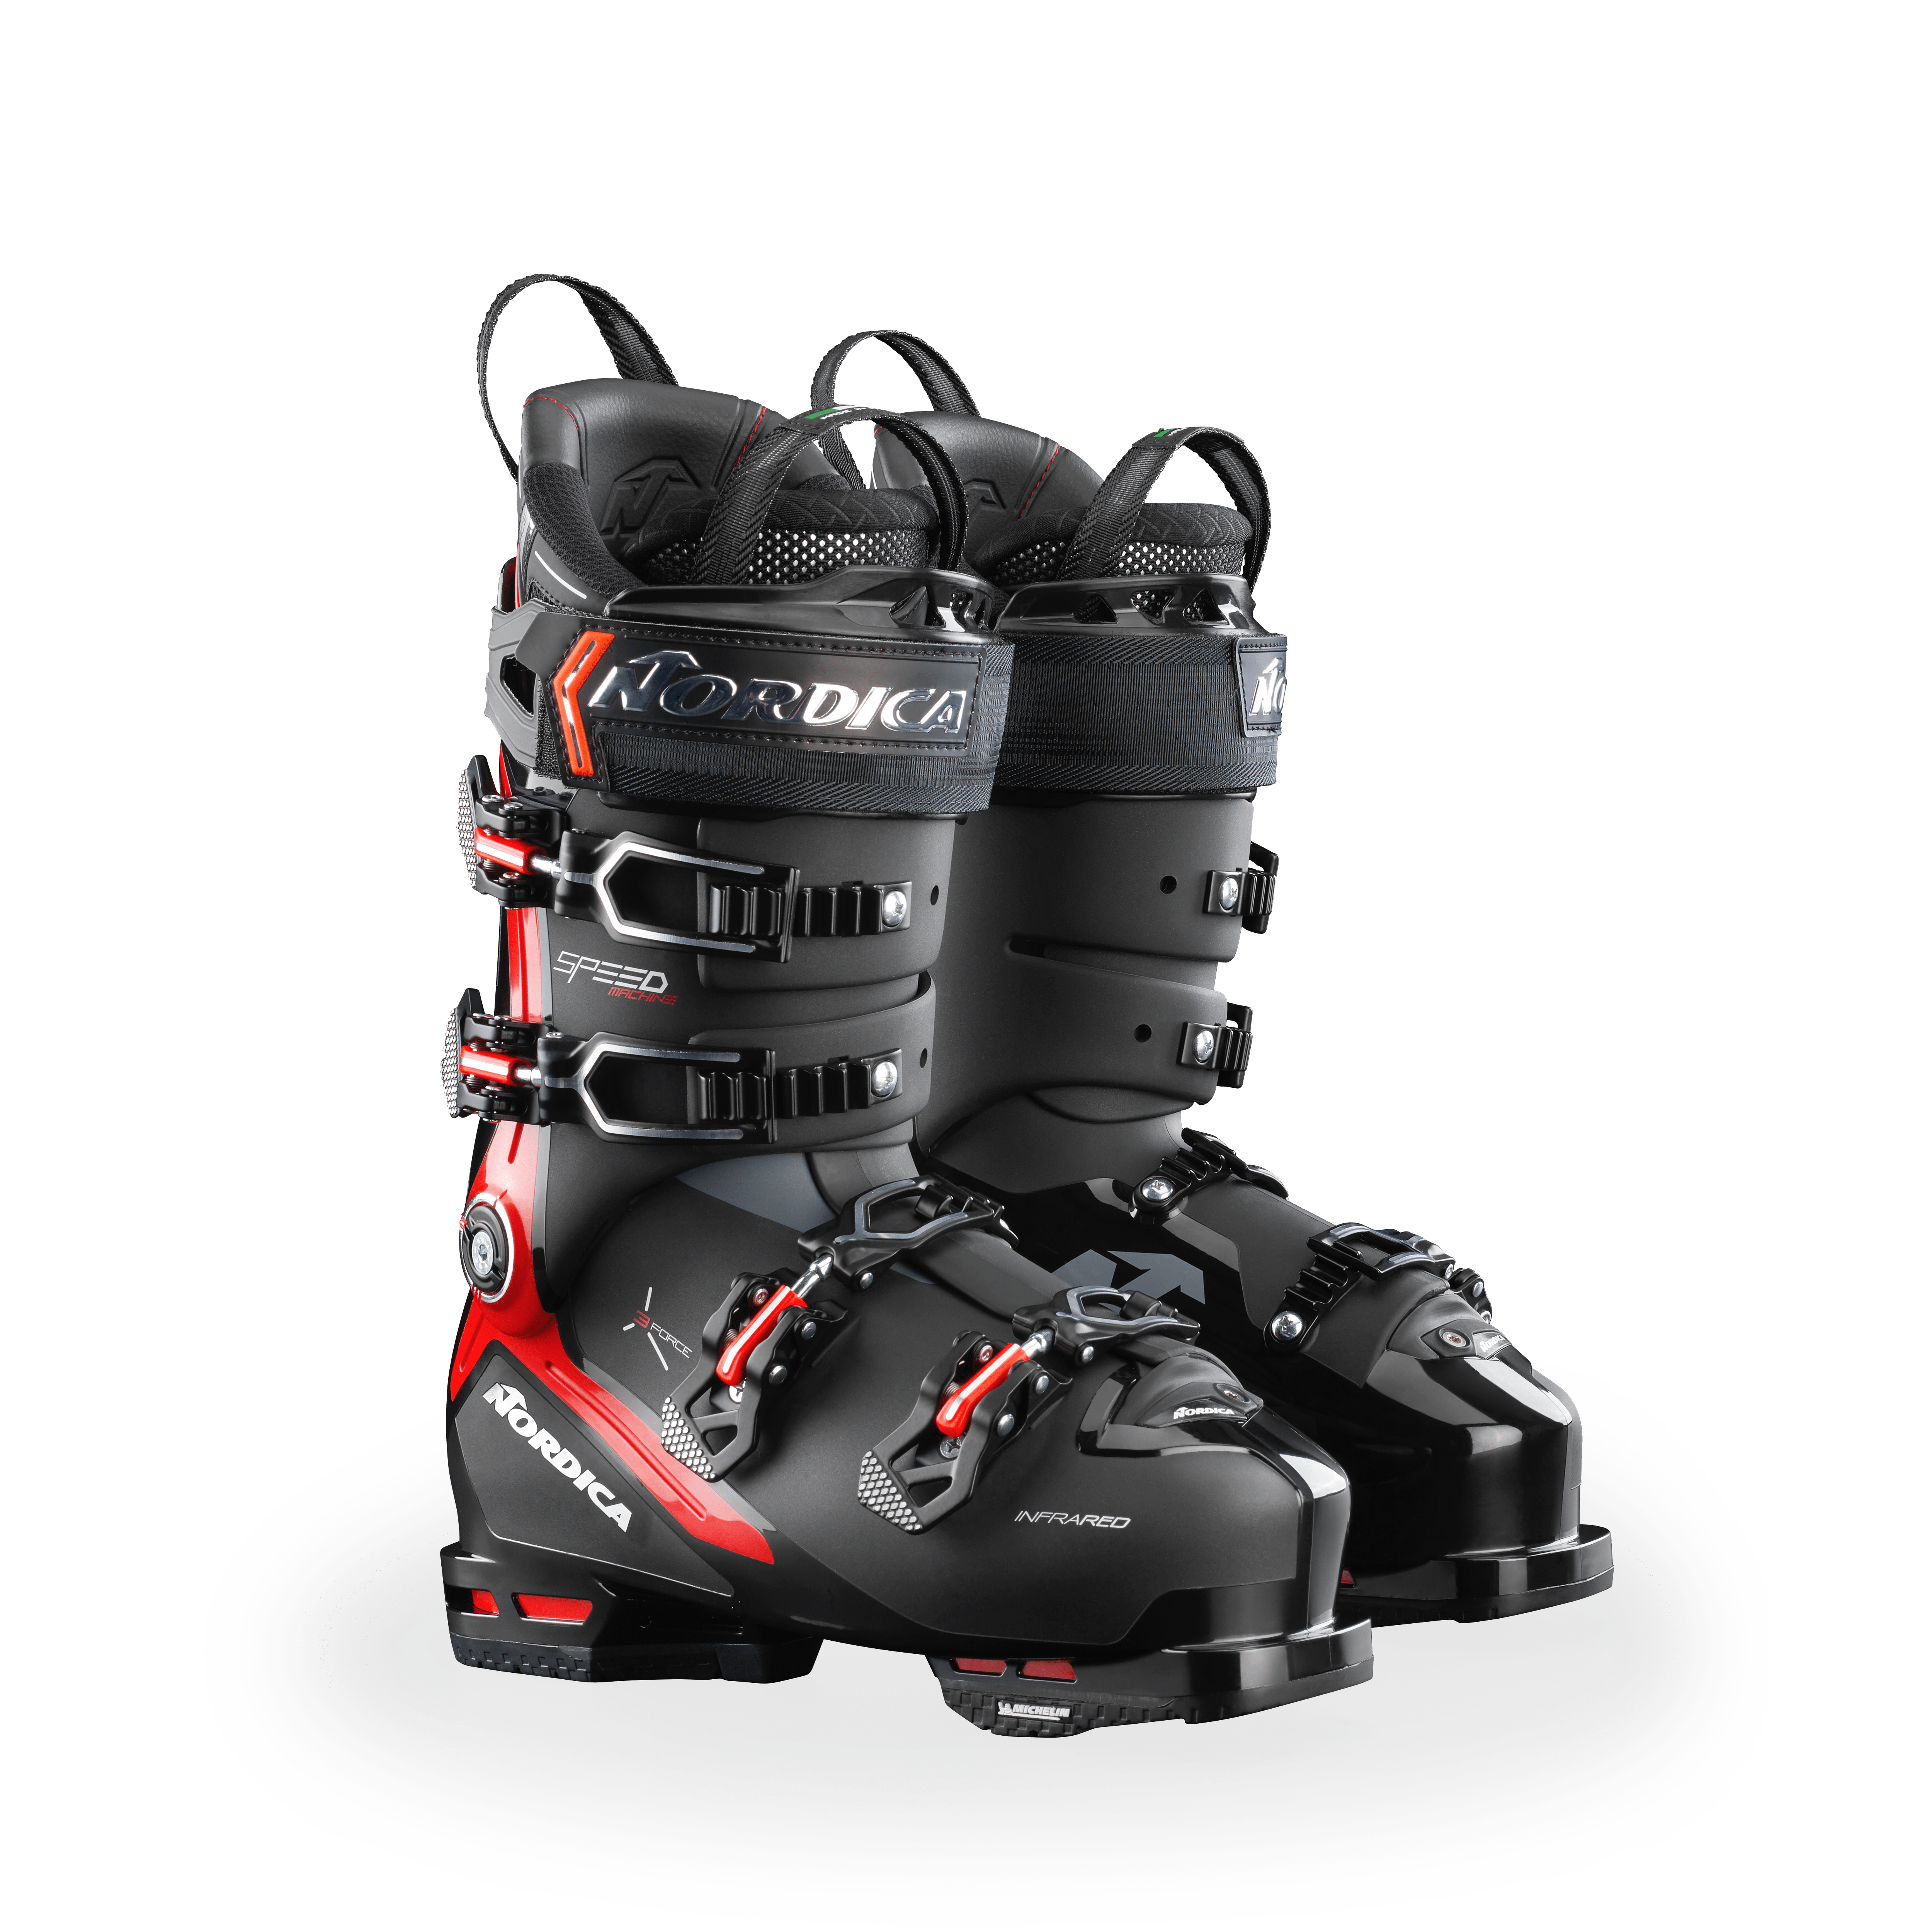 Speedmachine 3 130 S (GW) - Nordica - Skis and Boots – Official website